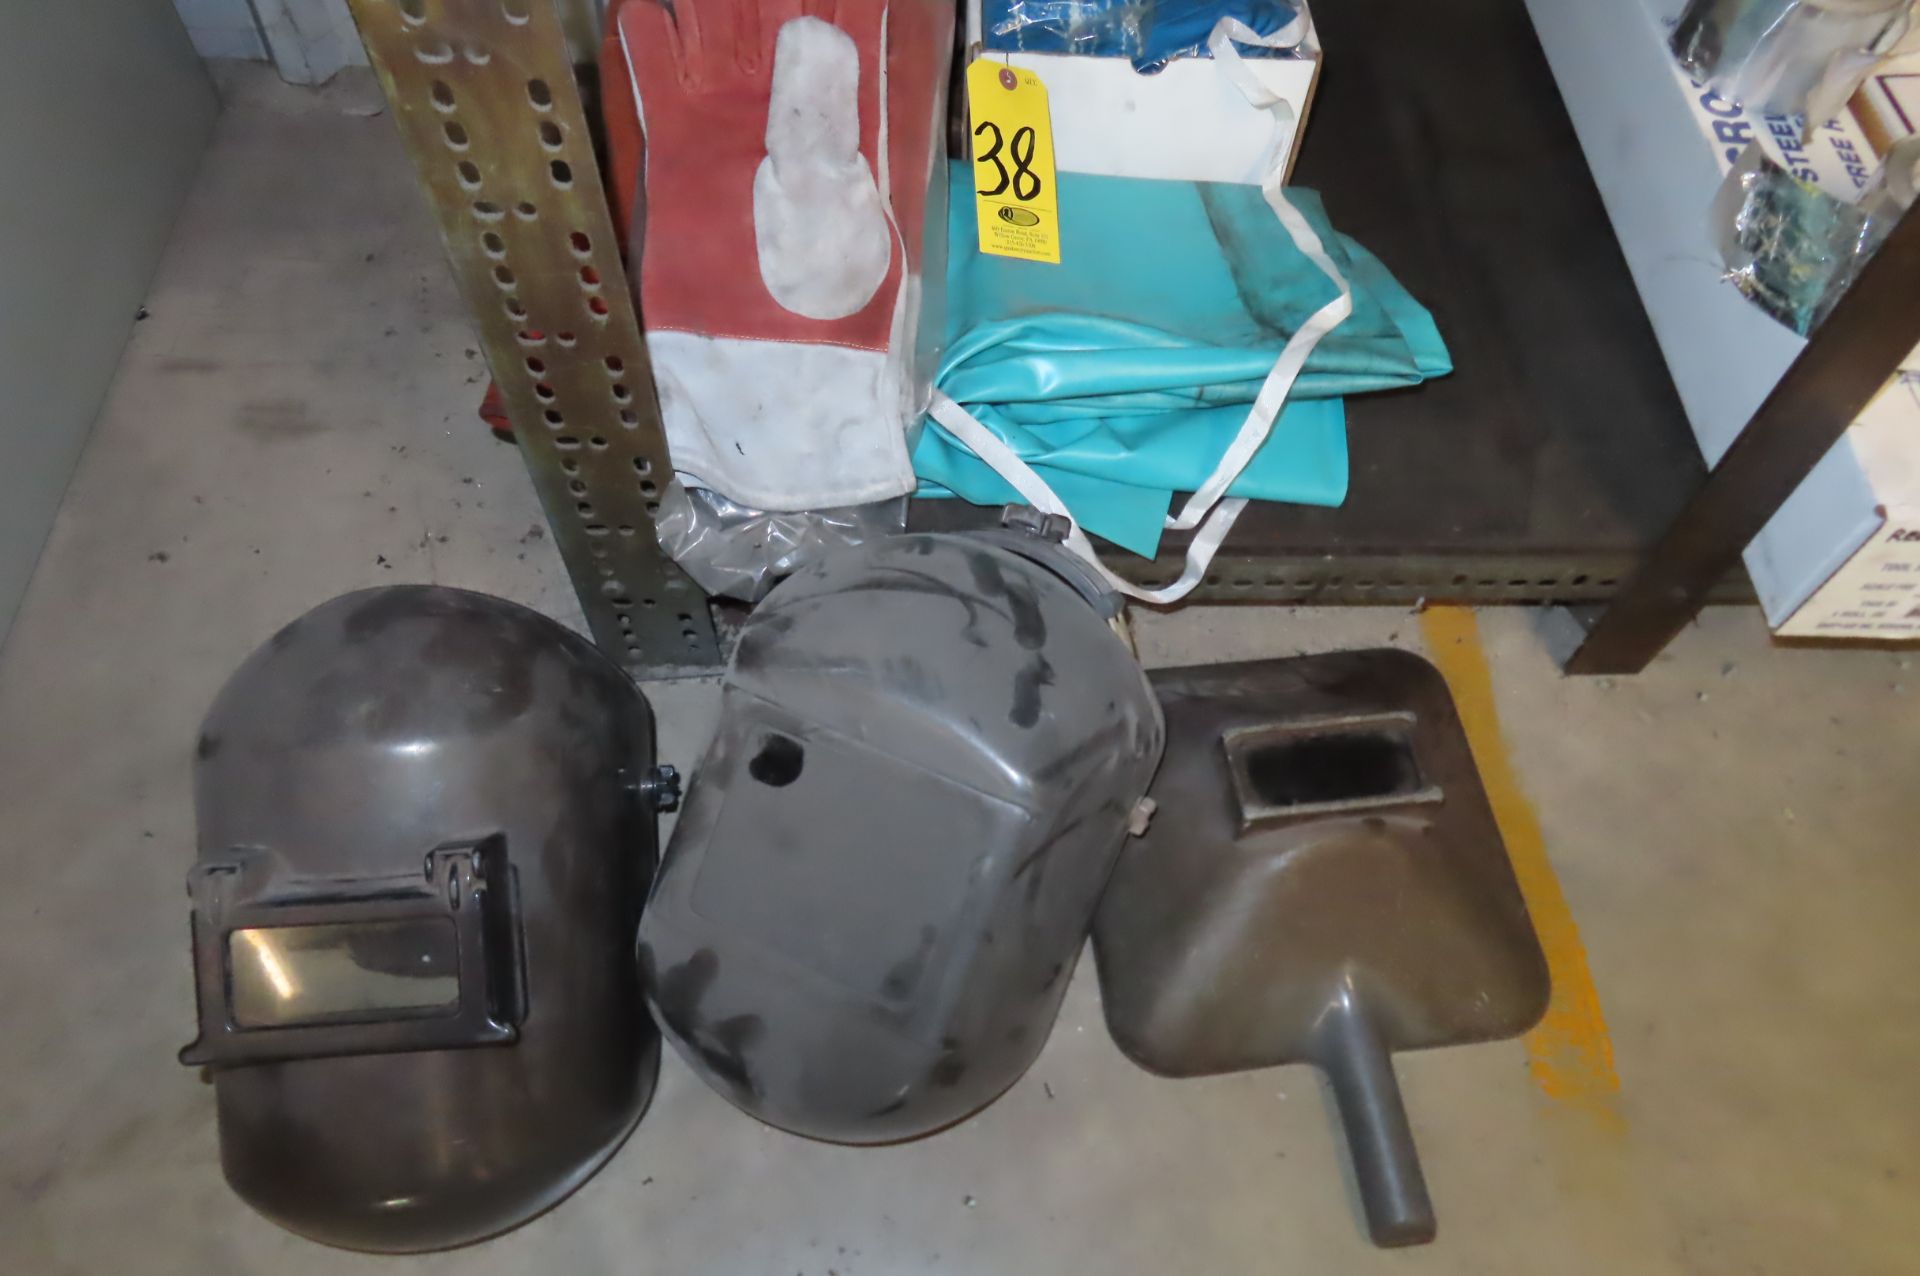 (2) WELDING HELMETS, (1) MASK, WELDING GLOVES, AND SAFETY WEAR - Image 3 of 3